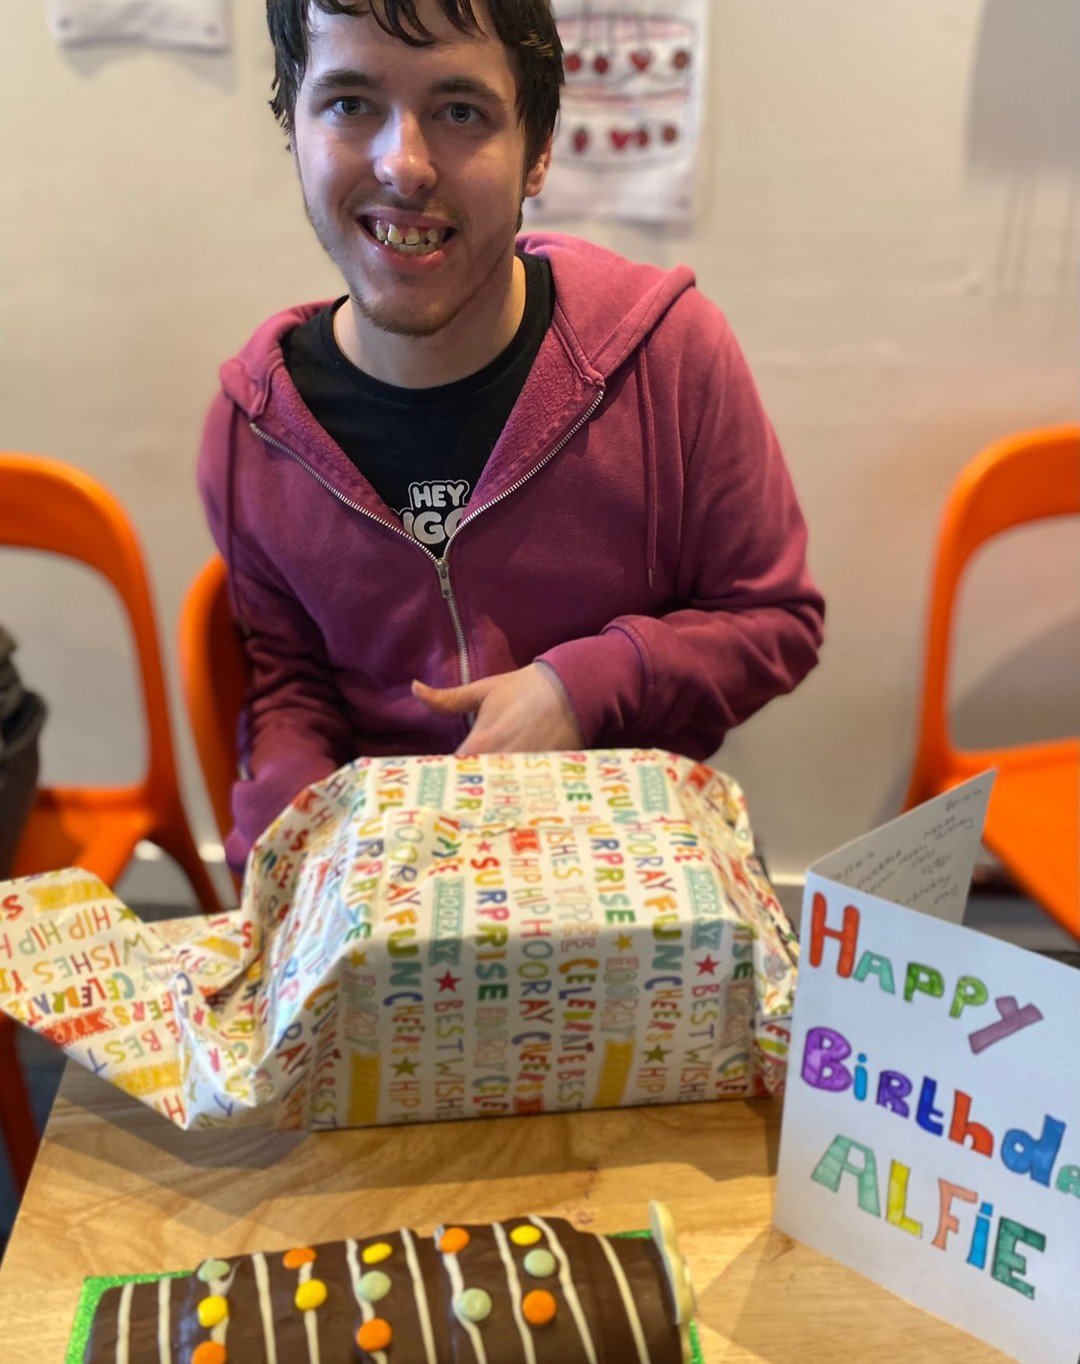 🎉🎂 Happy Birthday Alfie! 🎉🎂 We hope your day was filled with joy and laughter! 🥳 It was fantastic celebrating with you at Cube Extra tonight in Daventry! 🎈🎊#CubeLove